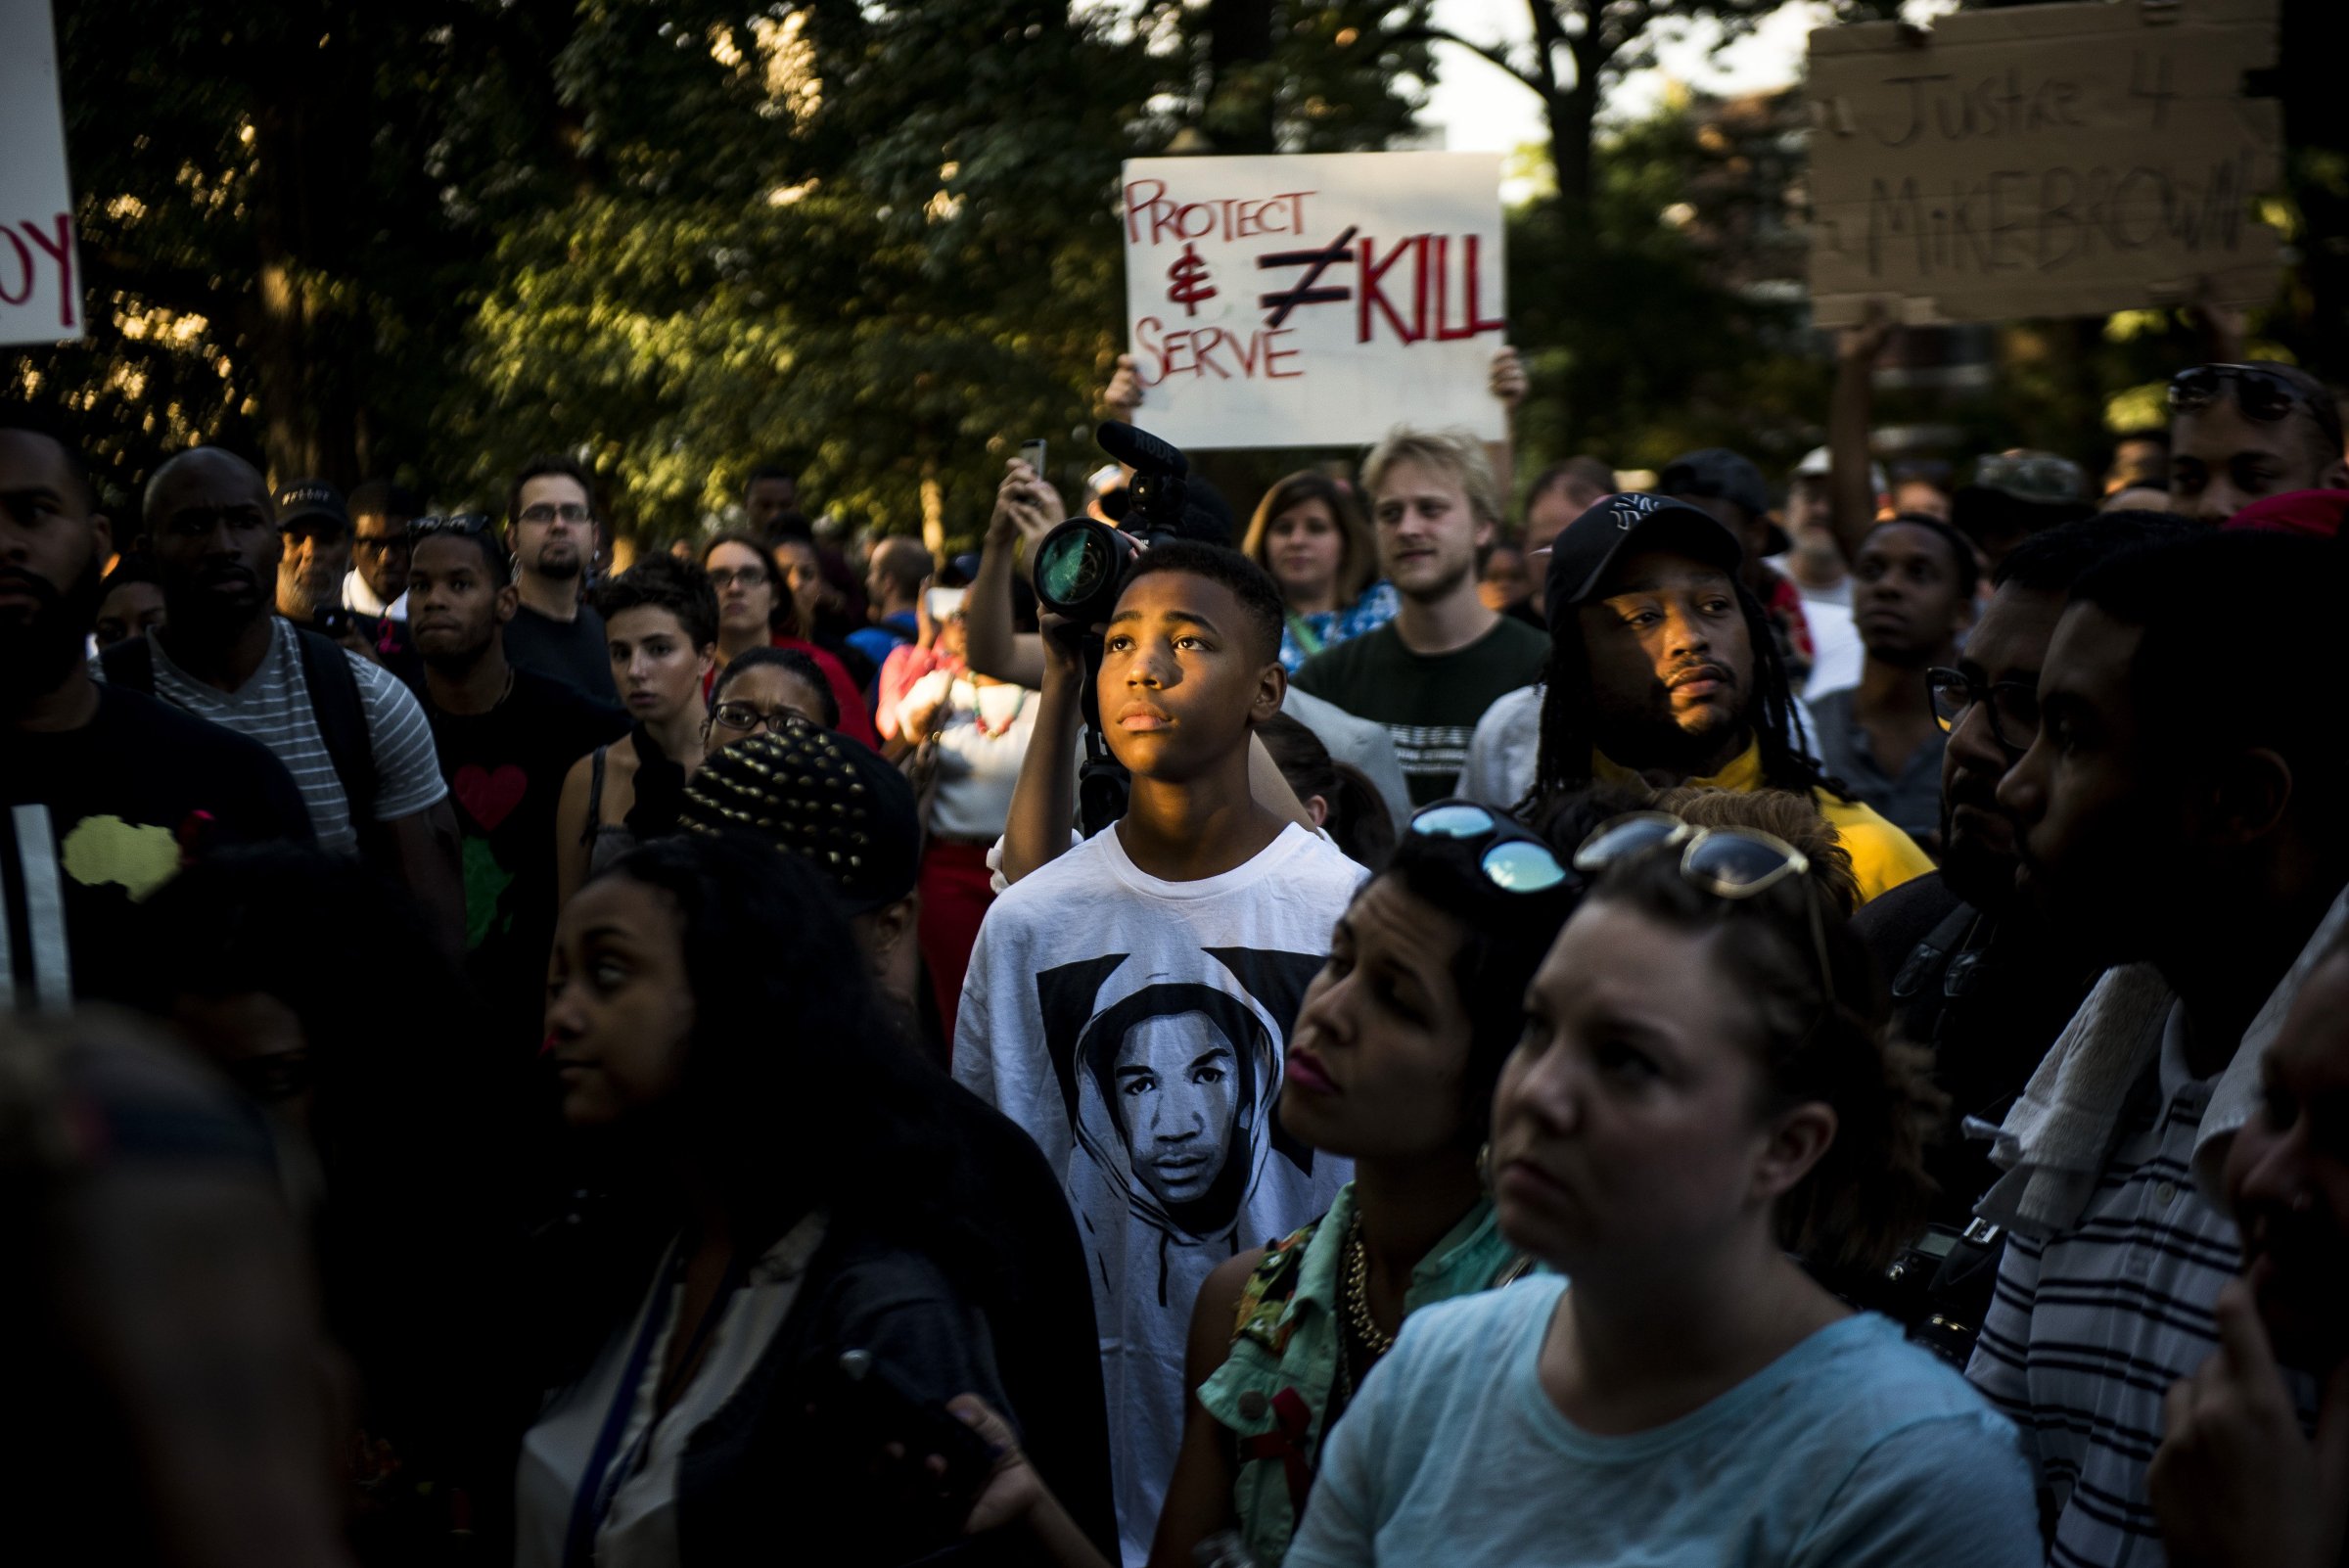 A demonstrator wearing a Trayvon Martin T-shirt stands with others in Washington D.C. to express solidarity with protesters in Ferguson, Mo.